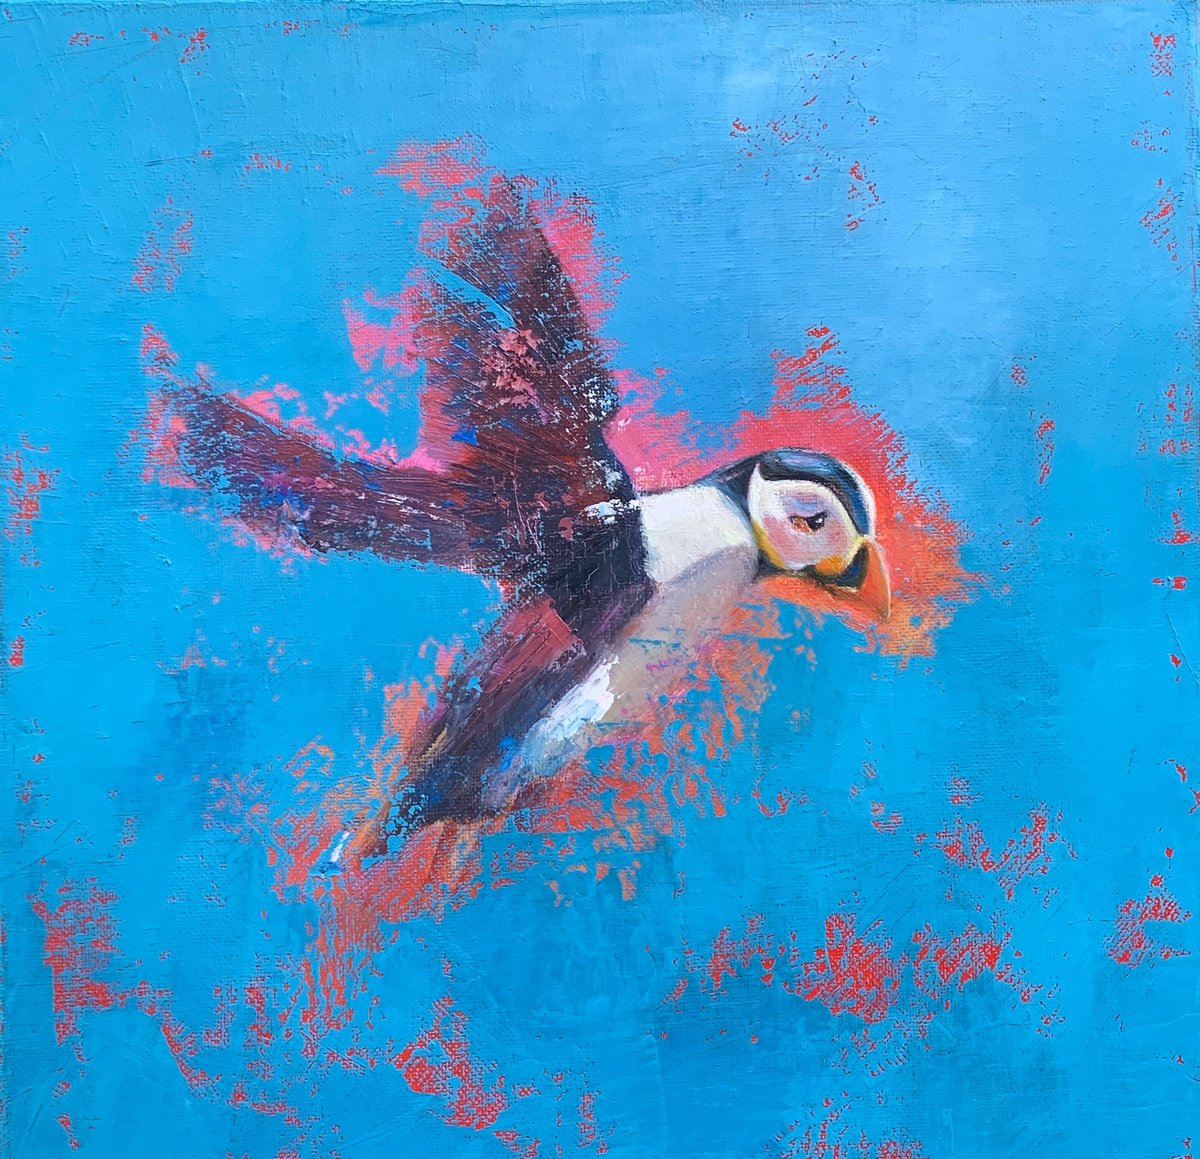 Flight of the Puffin by Laure Bury